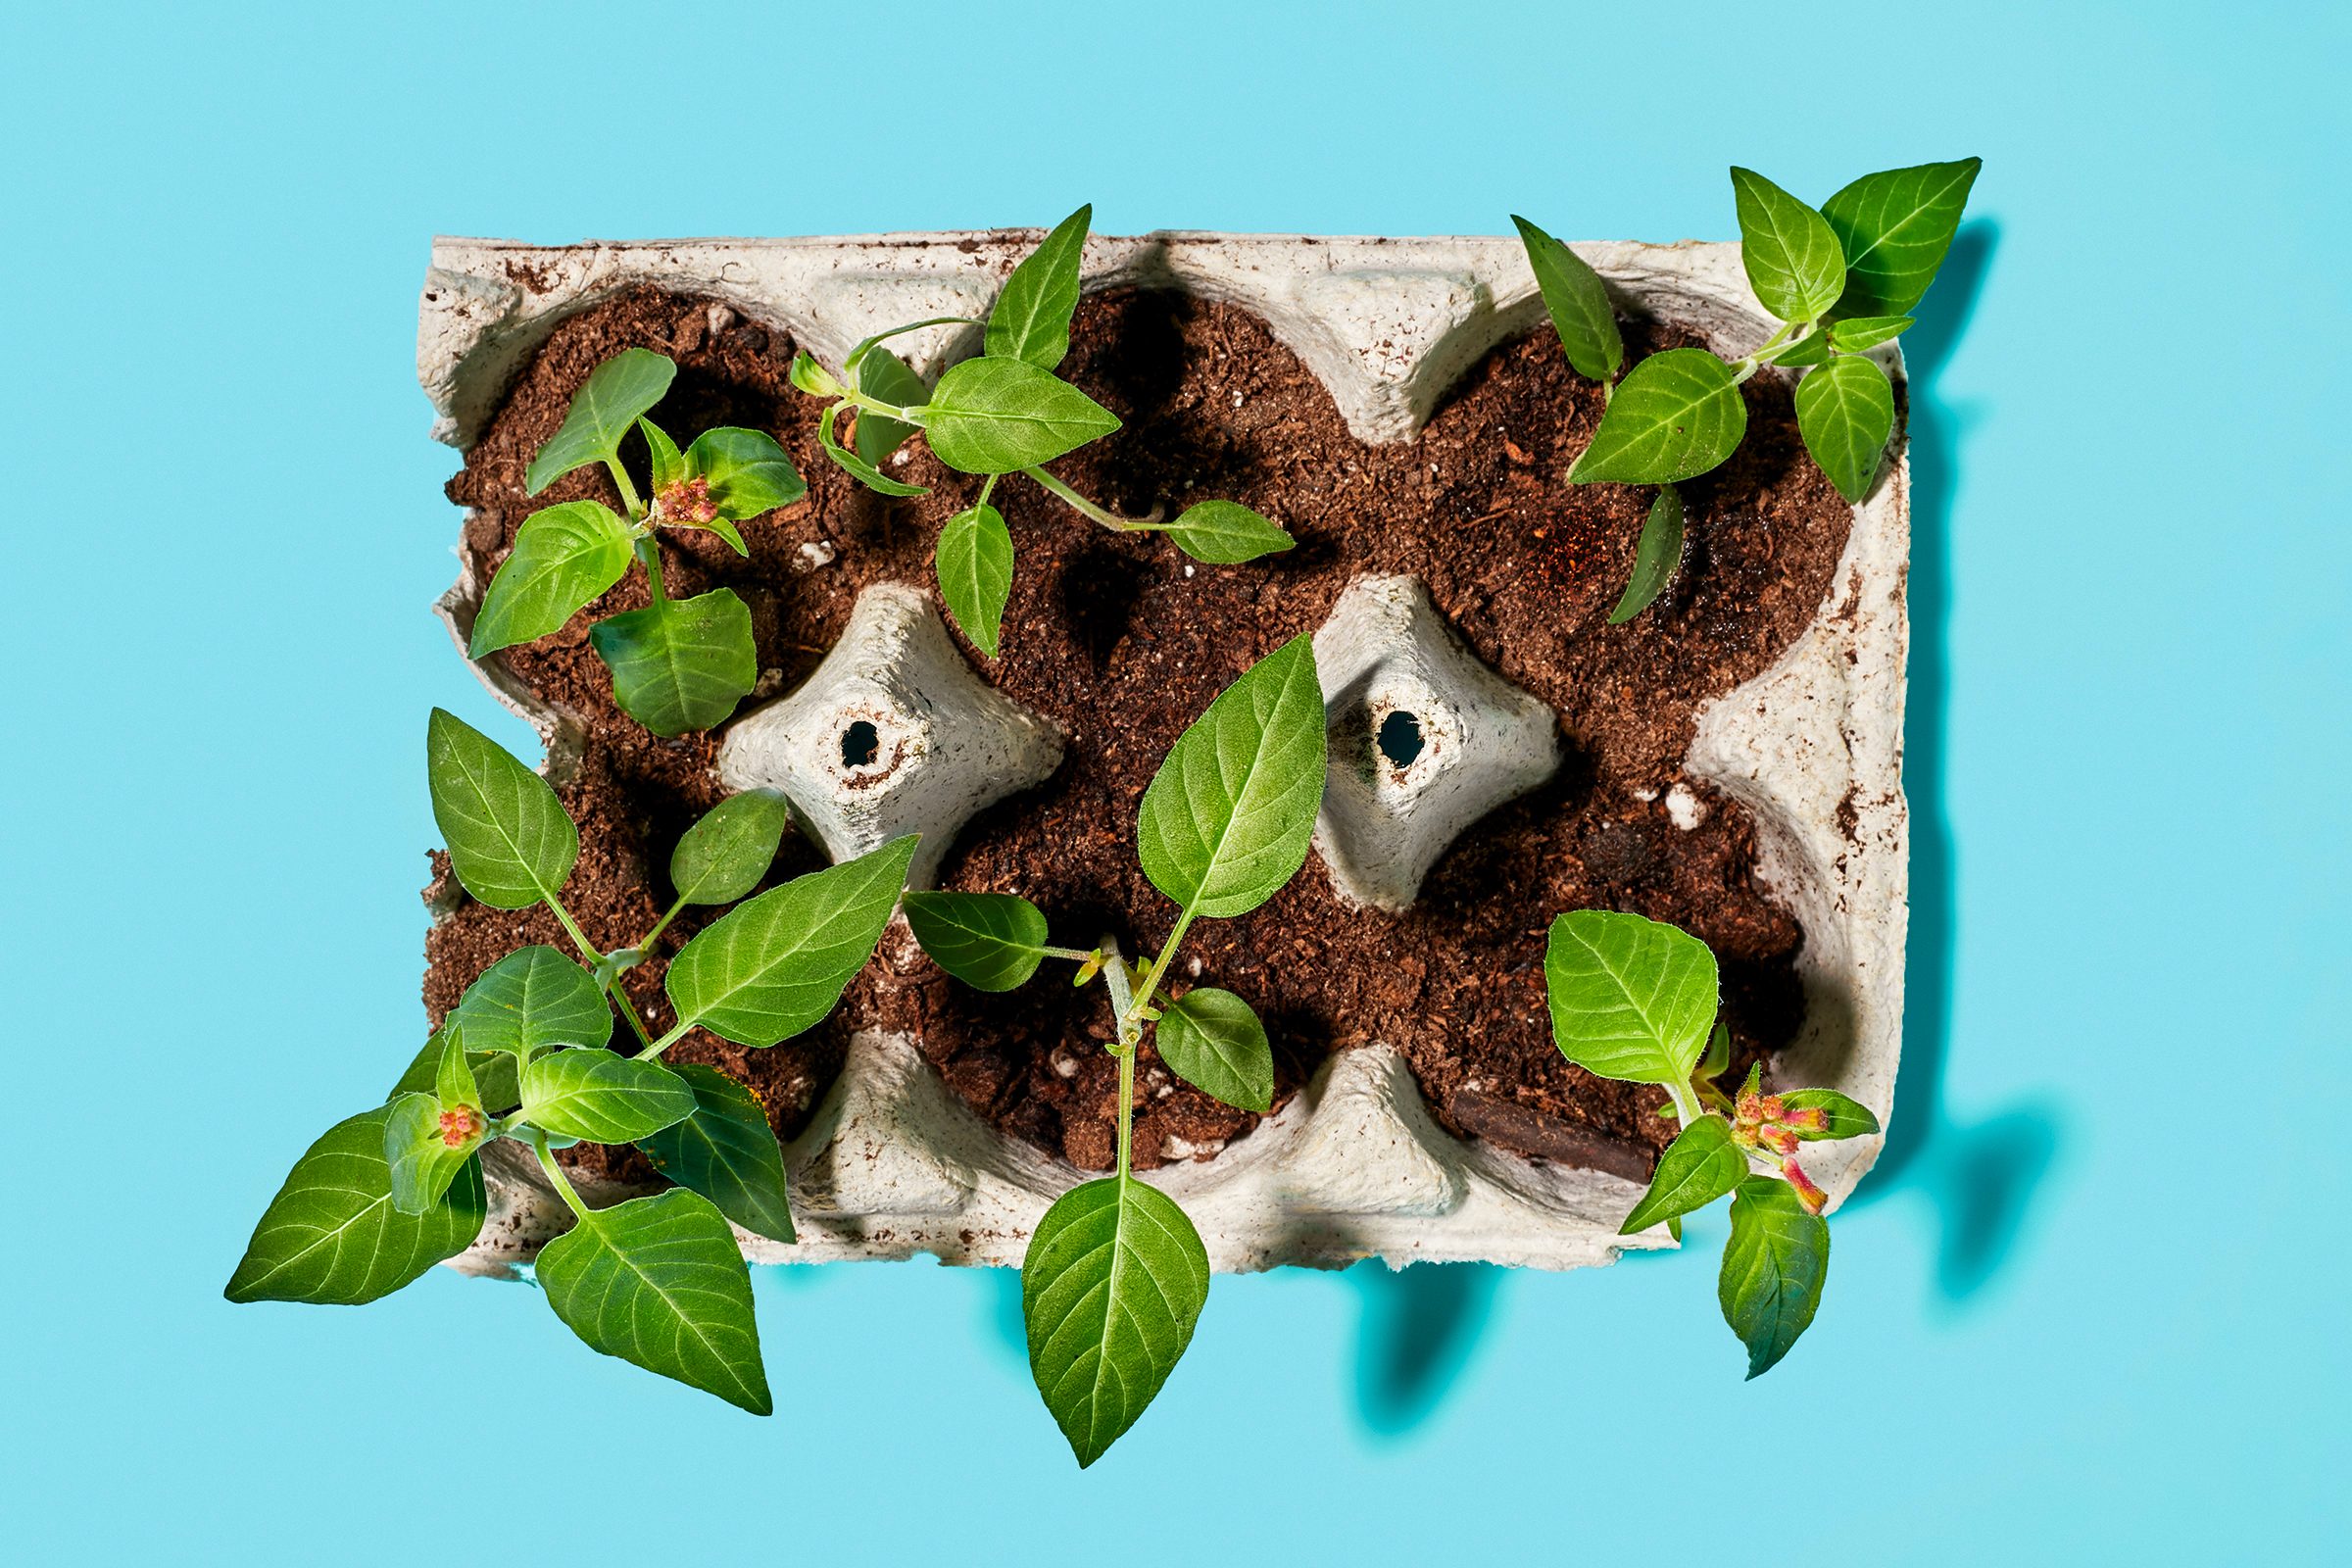 Sprouts growing in an egg carton